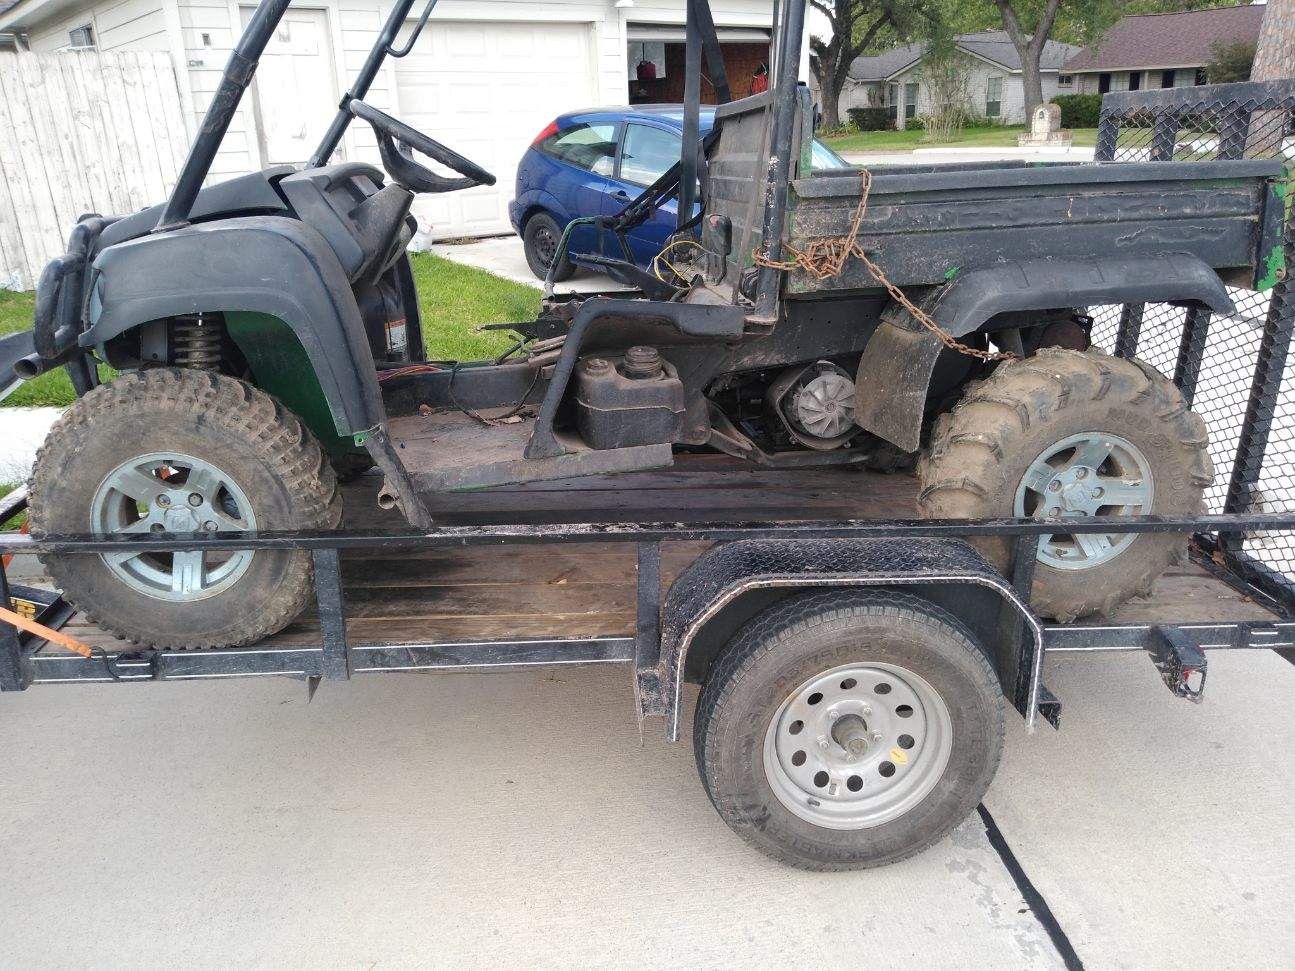 4x4 750 john deere gator 2009 needs work willing to trade for a cheap car or $1400 cash obo